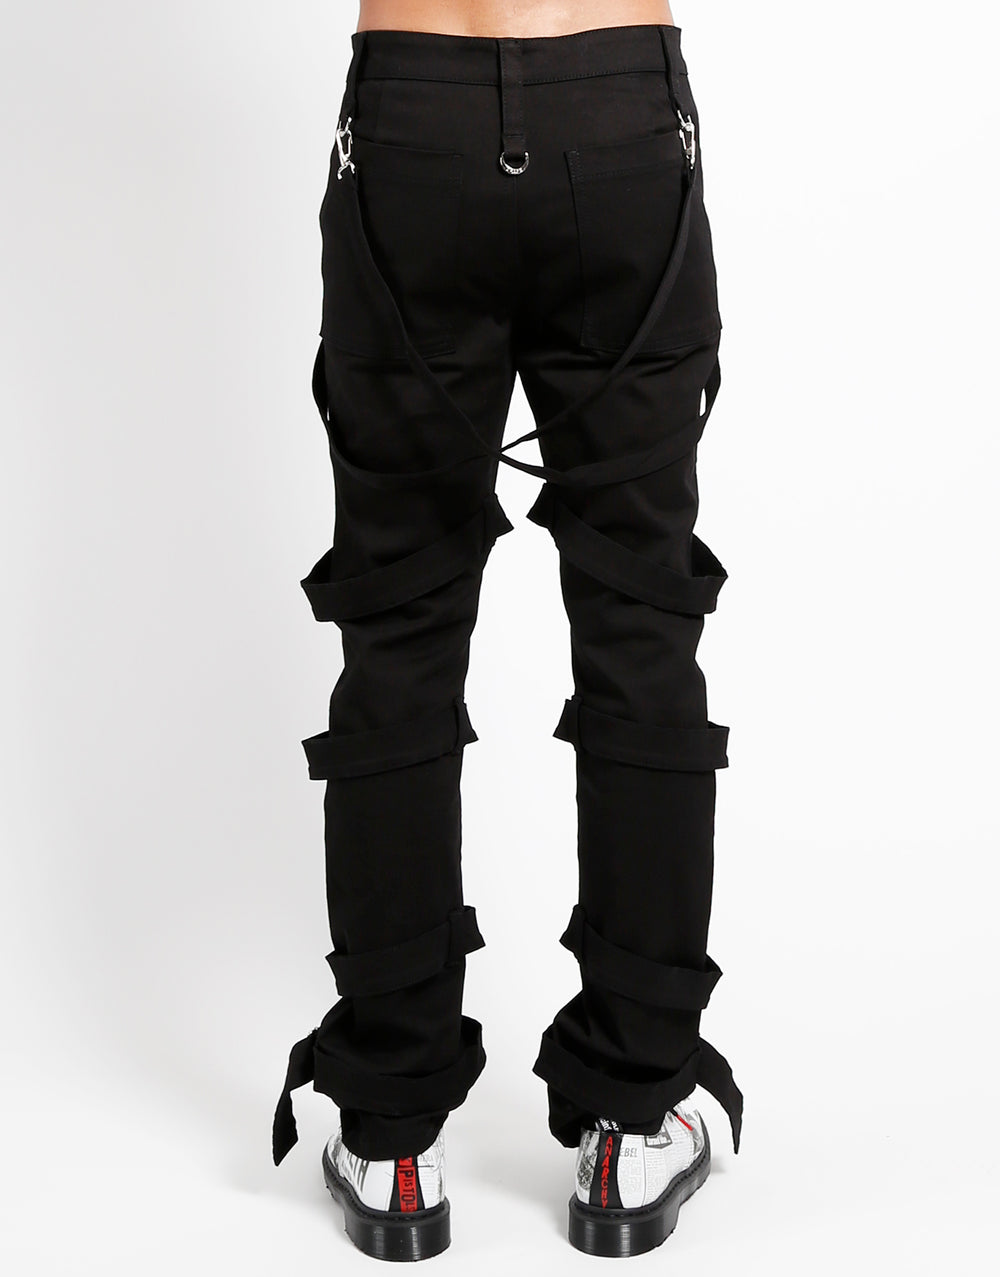 TRIPP NYC - THE HARNESS PANT